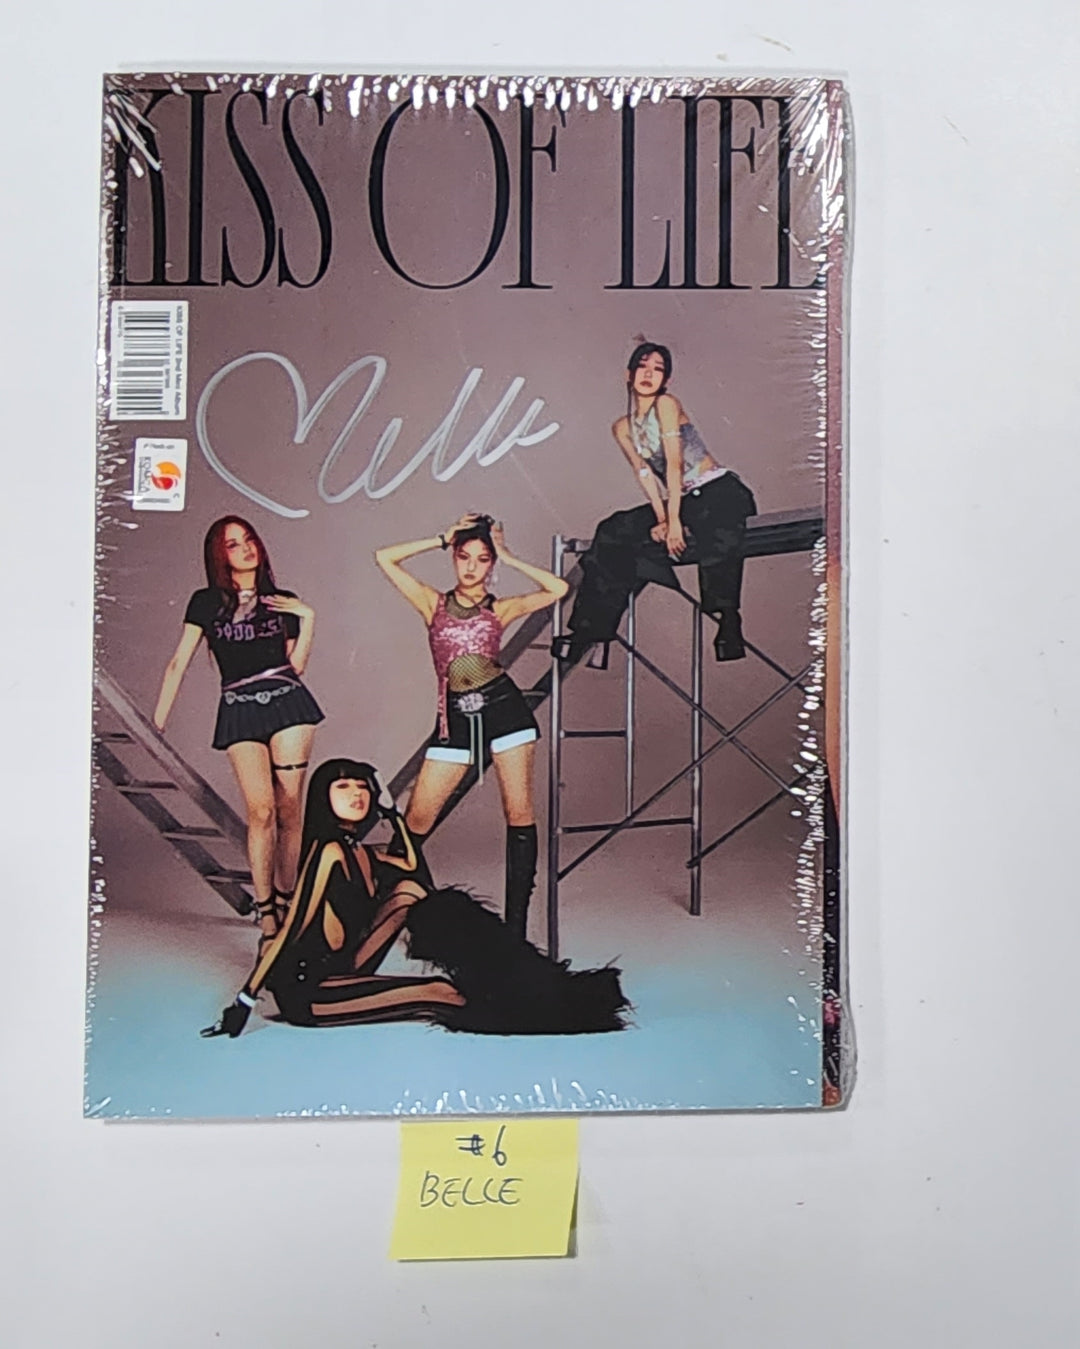 Kiss of Life "Born to be XX" - Hello82 Signed Album [23.11.21]